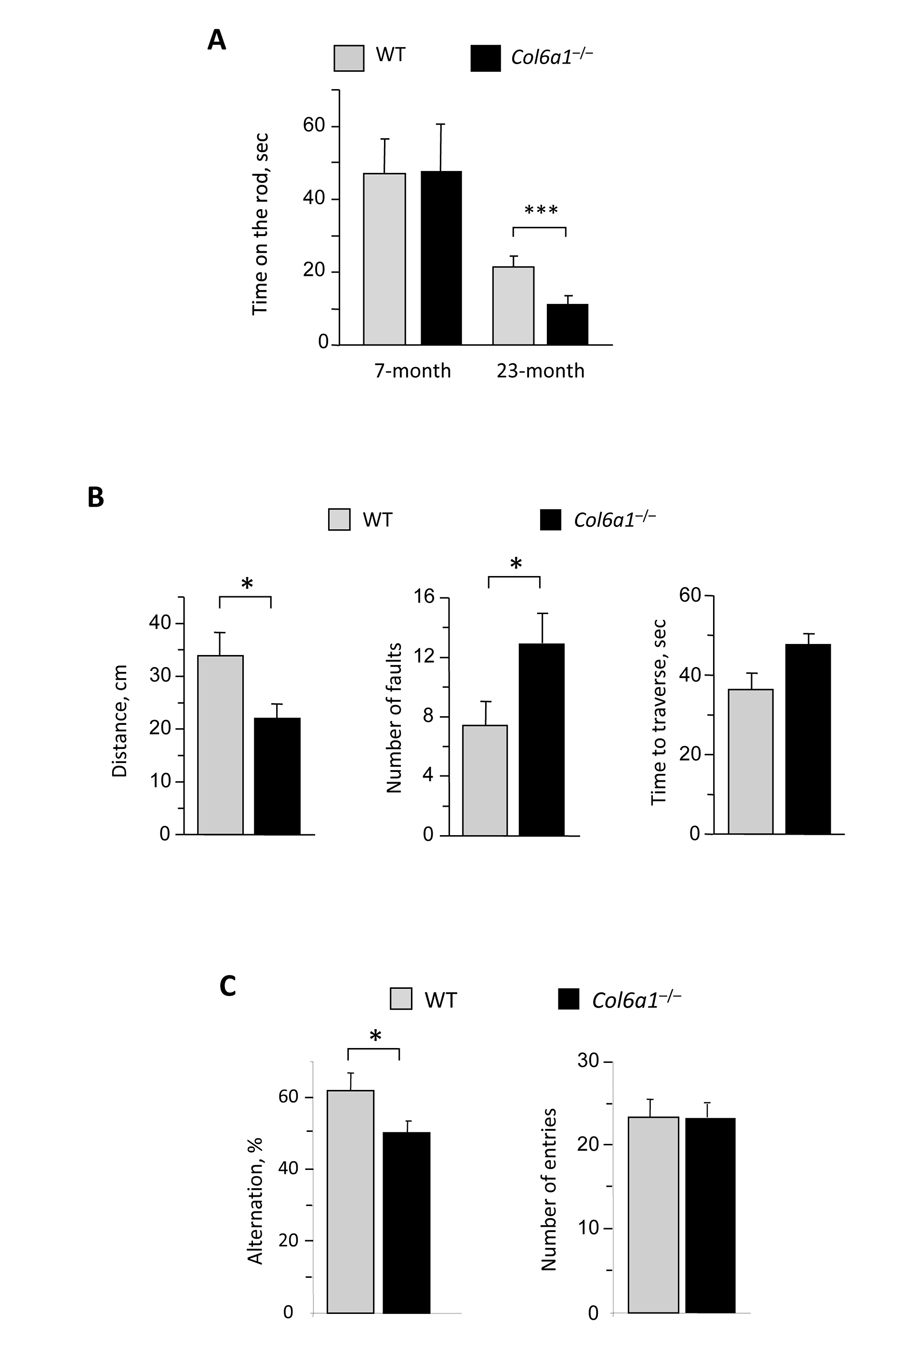 Reduced motor and memory tasks in aged Col6a1−/− mice